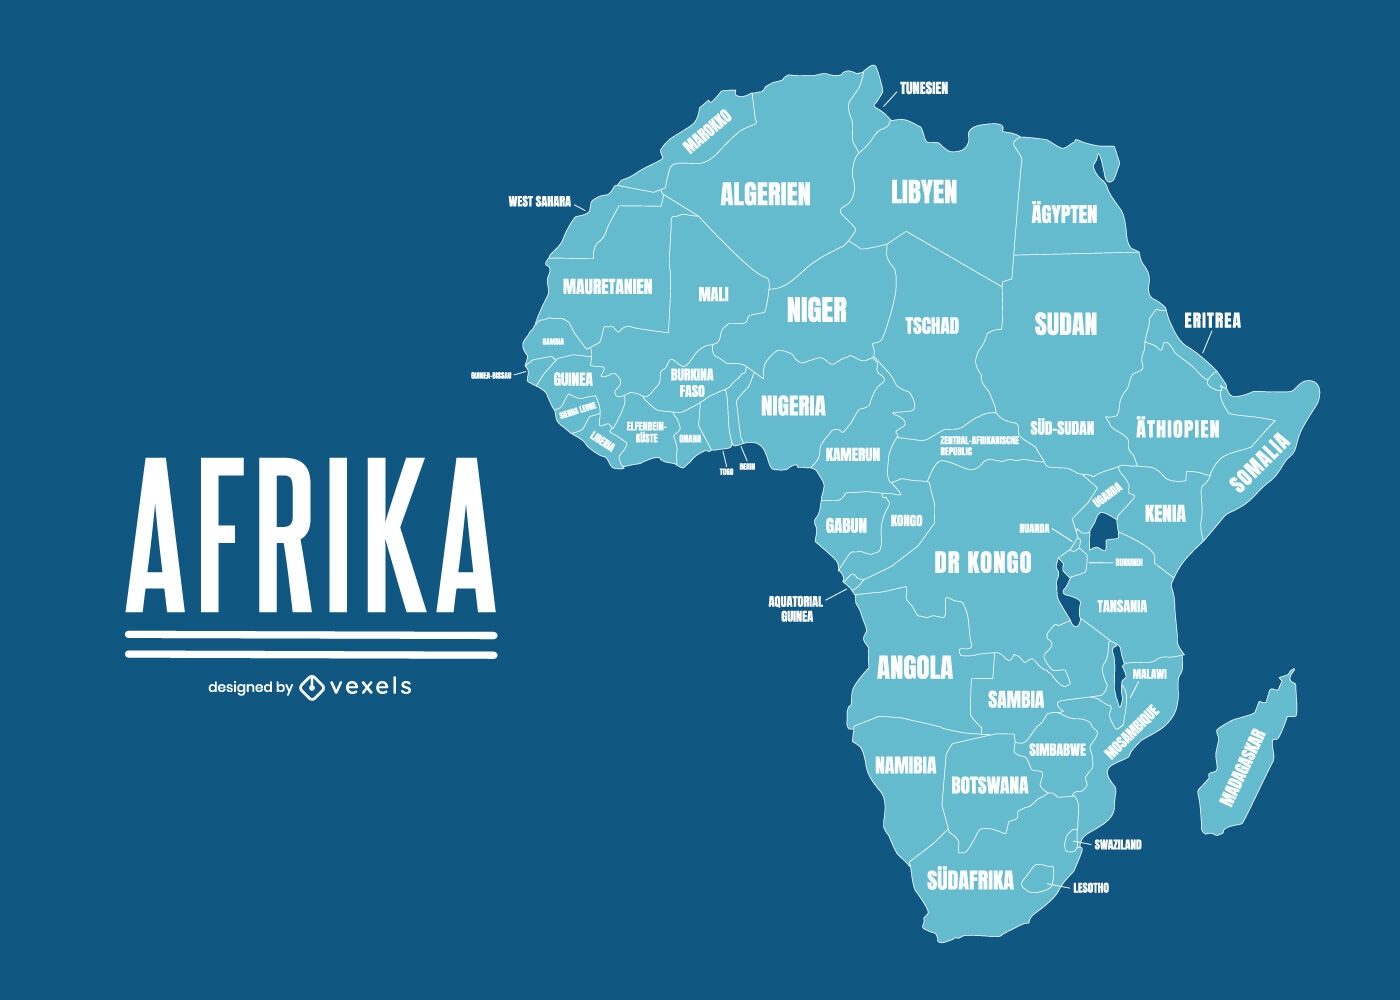 Geographical map of Africa with country names